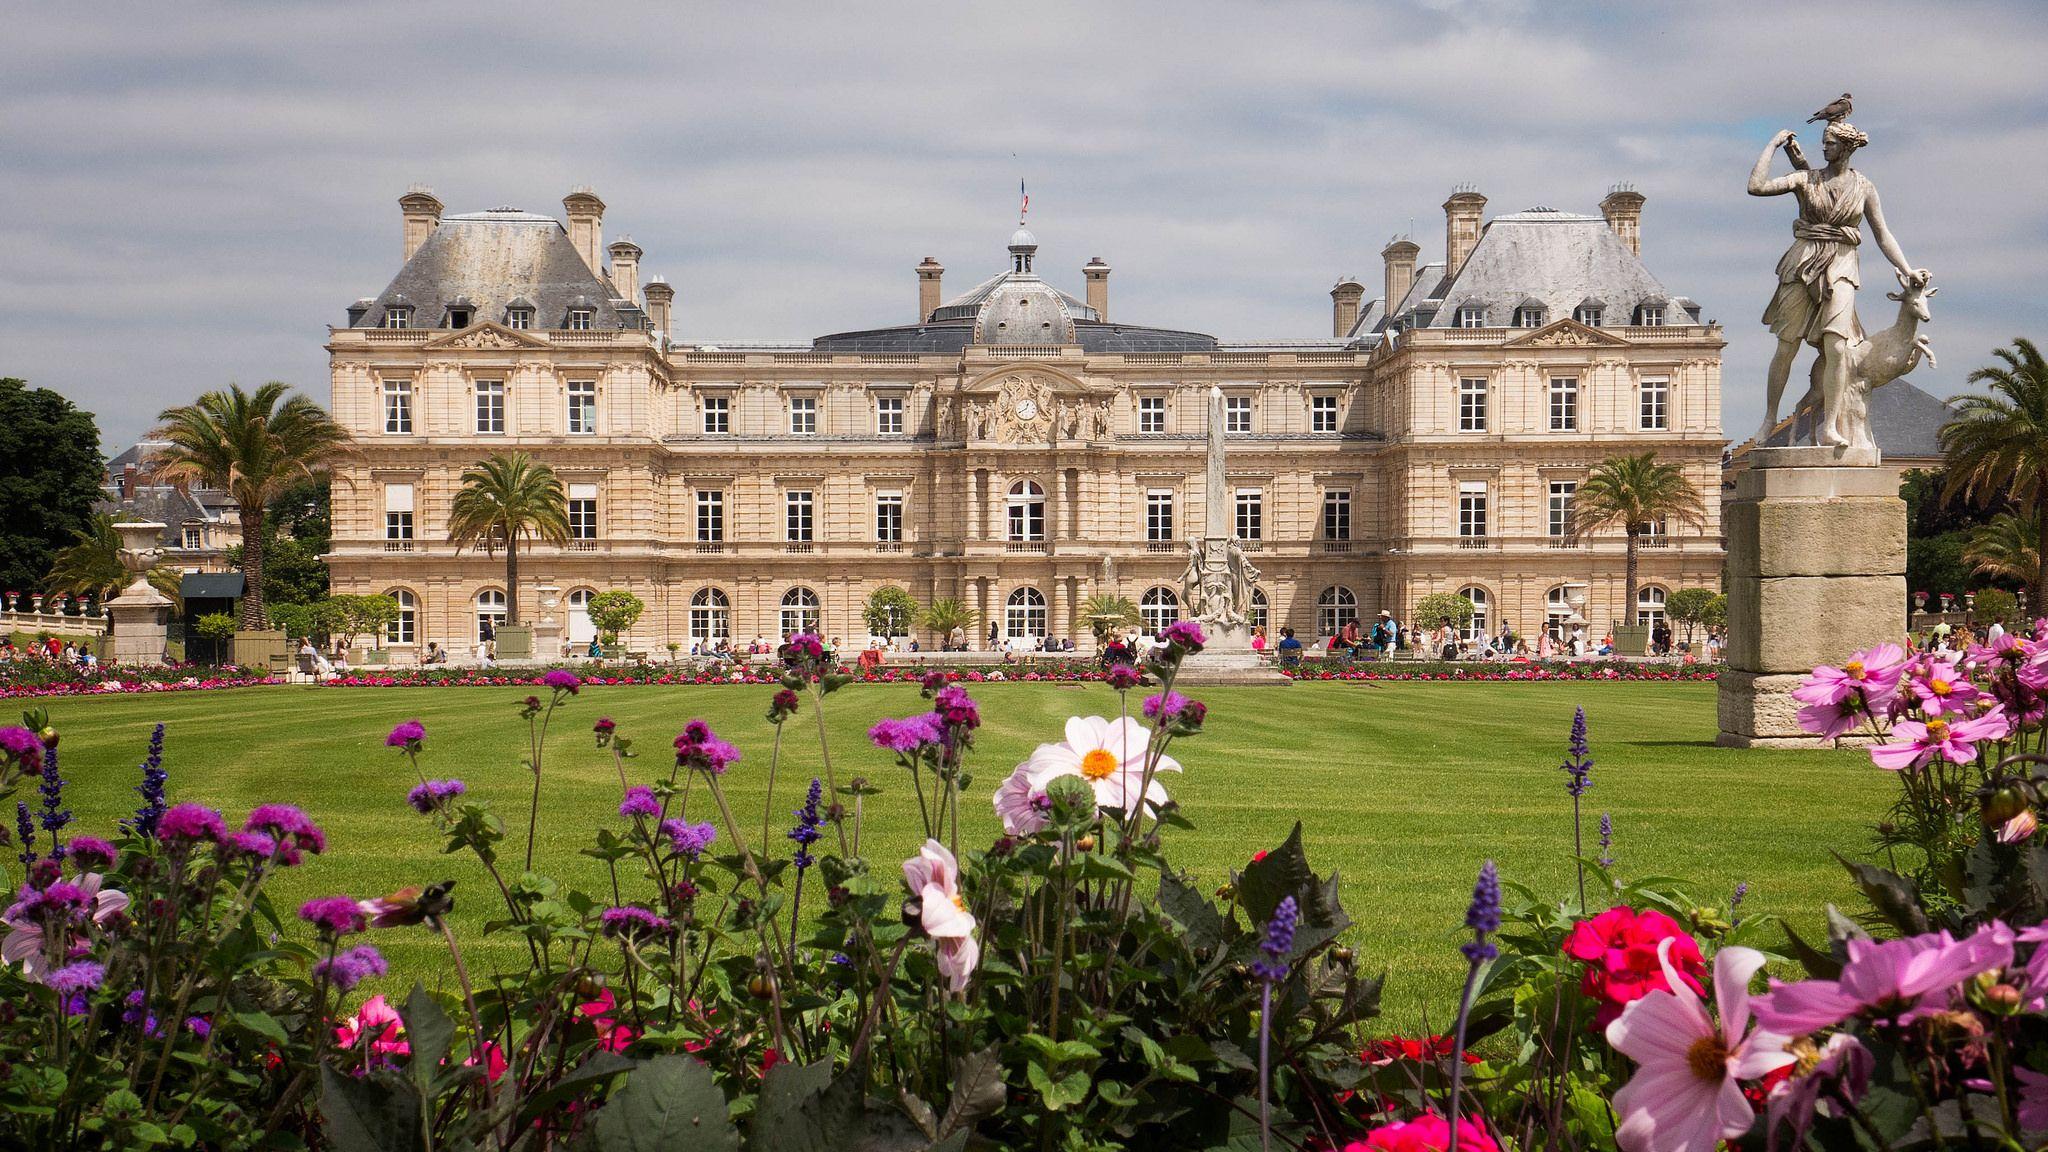 Luxembourg Palace, Paris France HD Wallpaper. Background Image